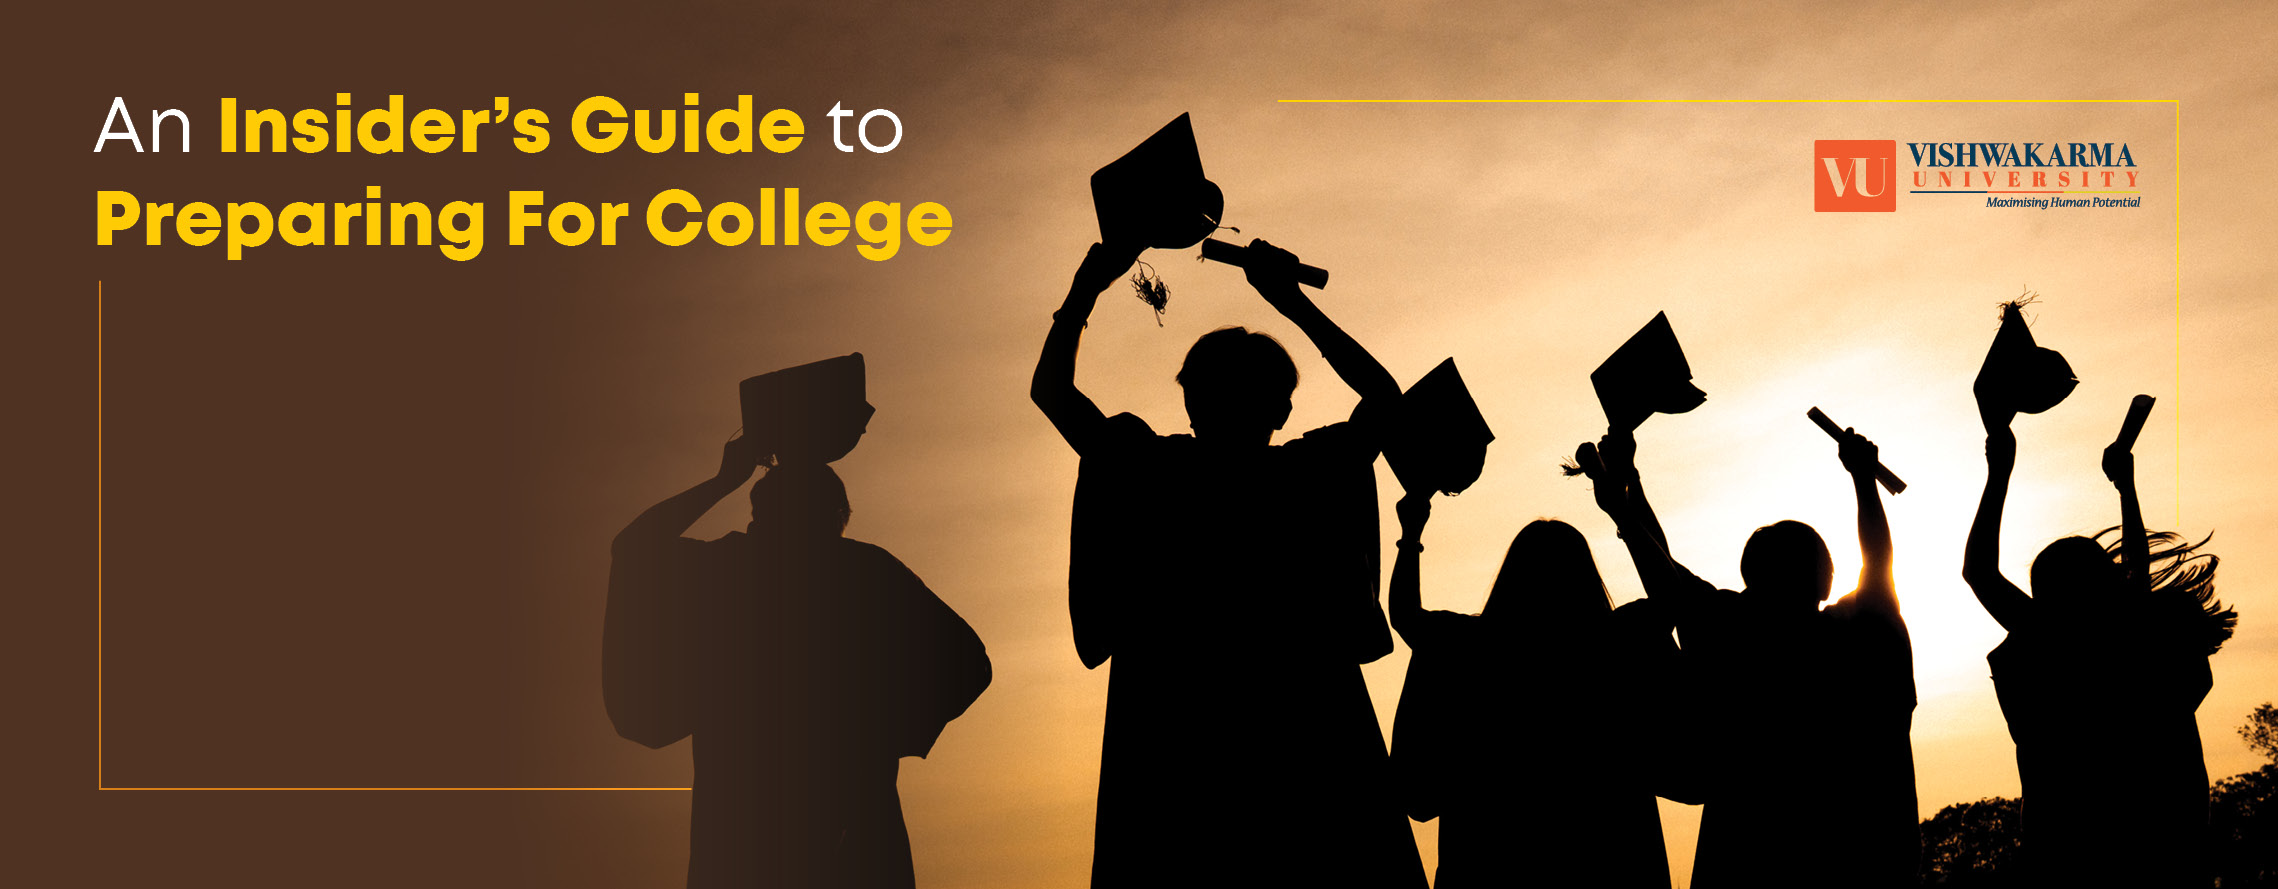 An Insider's Guide to Preparing for College